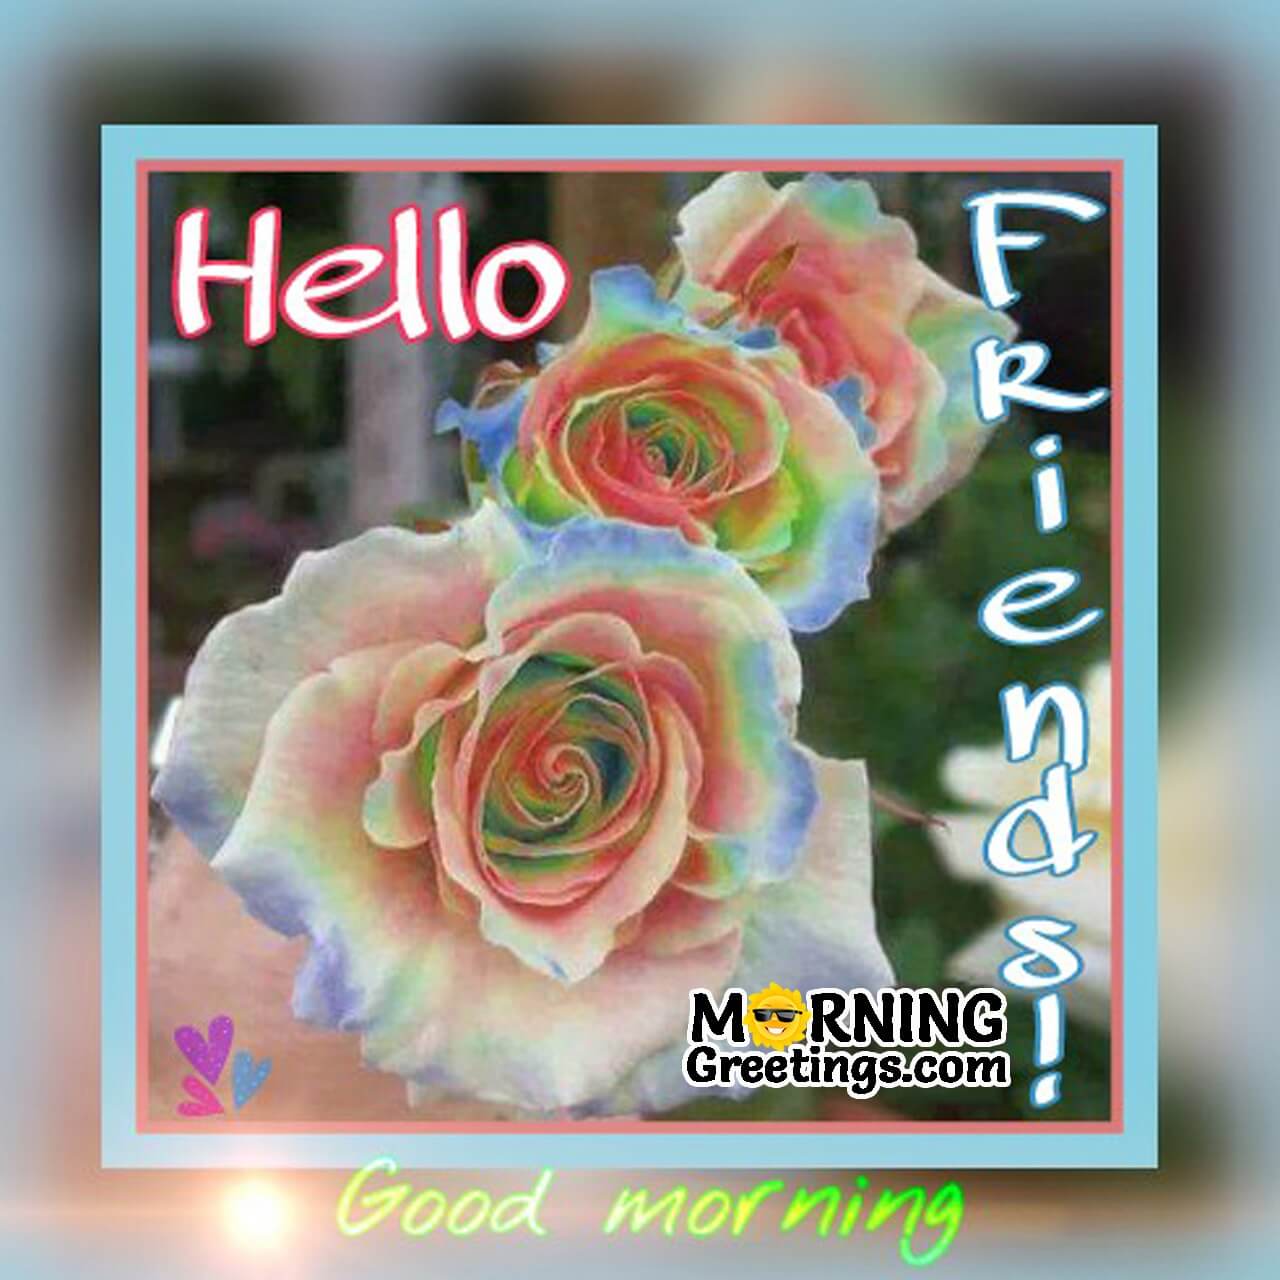 10 Fantastic Hello Morning Greetings For Friends - Morning ...